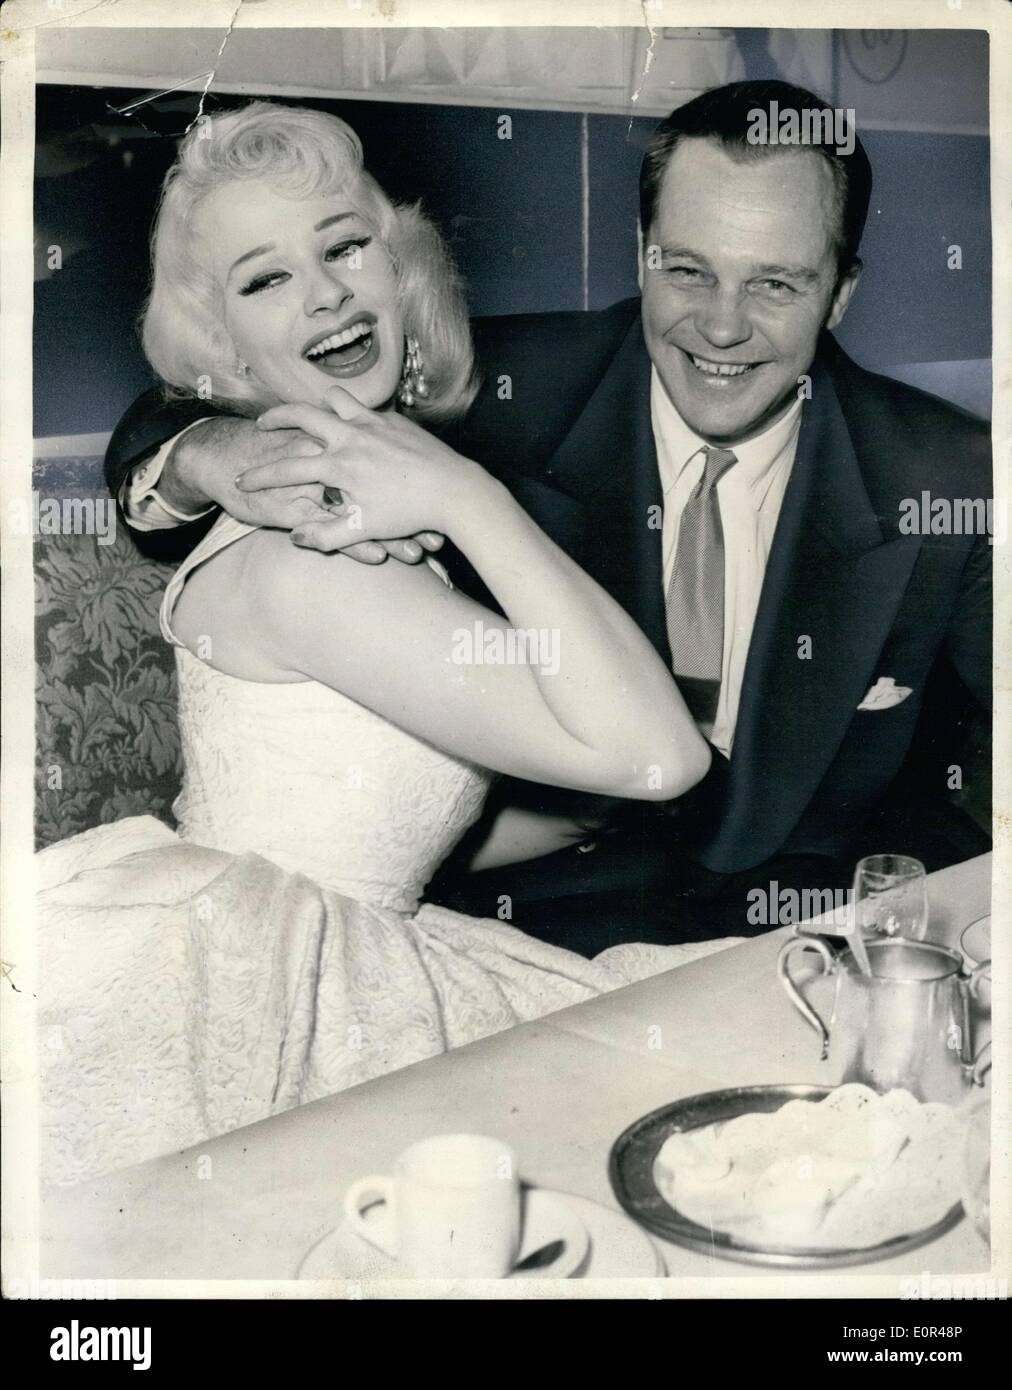 Dec. 09, 1957 - The Prince And The Show Girl Sabrina And Prince Christine Of Honover: Popular show girl Sabrina appears to having plenty of fun with Prince Christian of Hanover dinner at the Colony Restaurant, London. It is said that the Prince, planed to escort Sabrina to the Variety Artists Ladies Ball at the Dorchester Hotel - but he is unable to do as he is still in morning for Prince George of Greece. Stock Photo